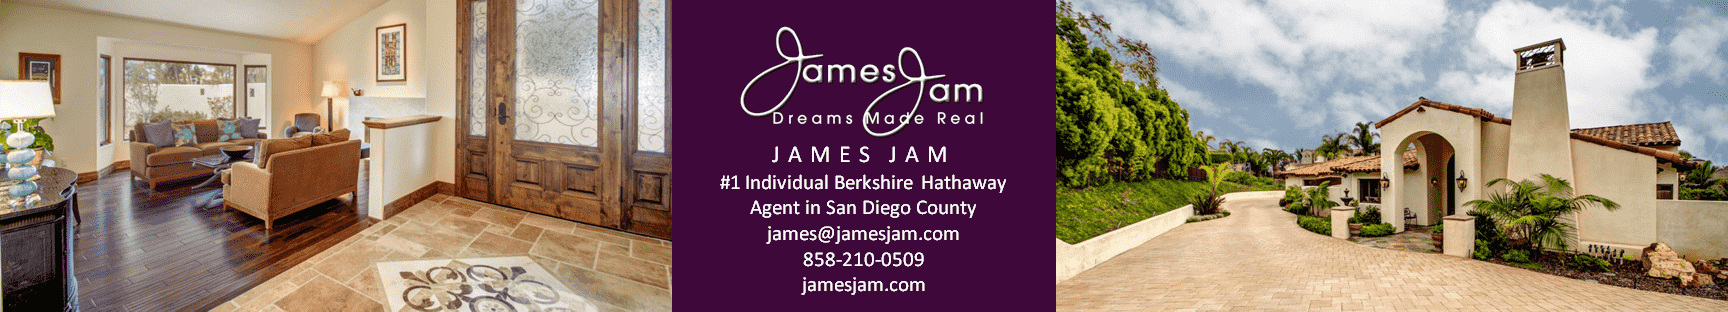 Contact James Jam Luxury Property Specialist – North County Realtor